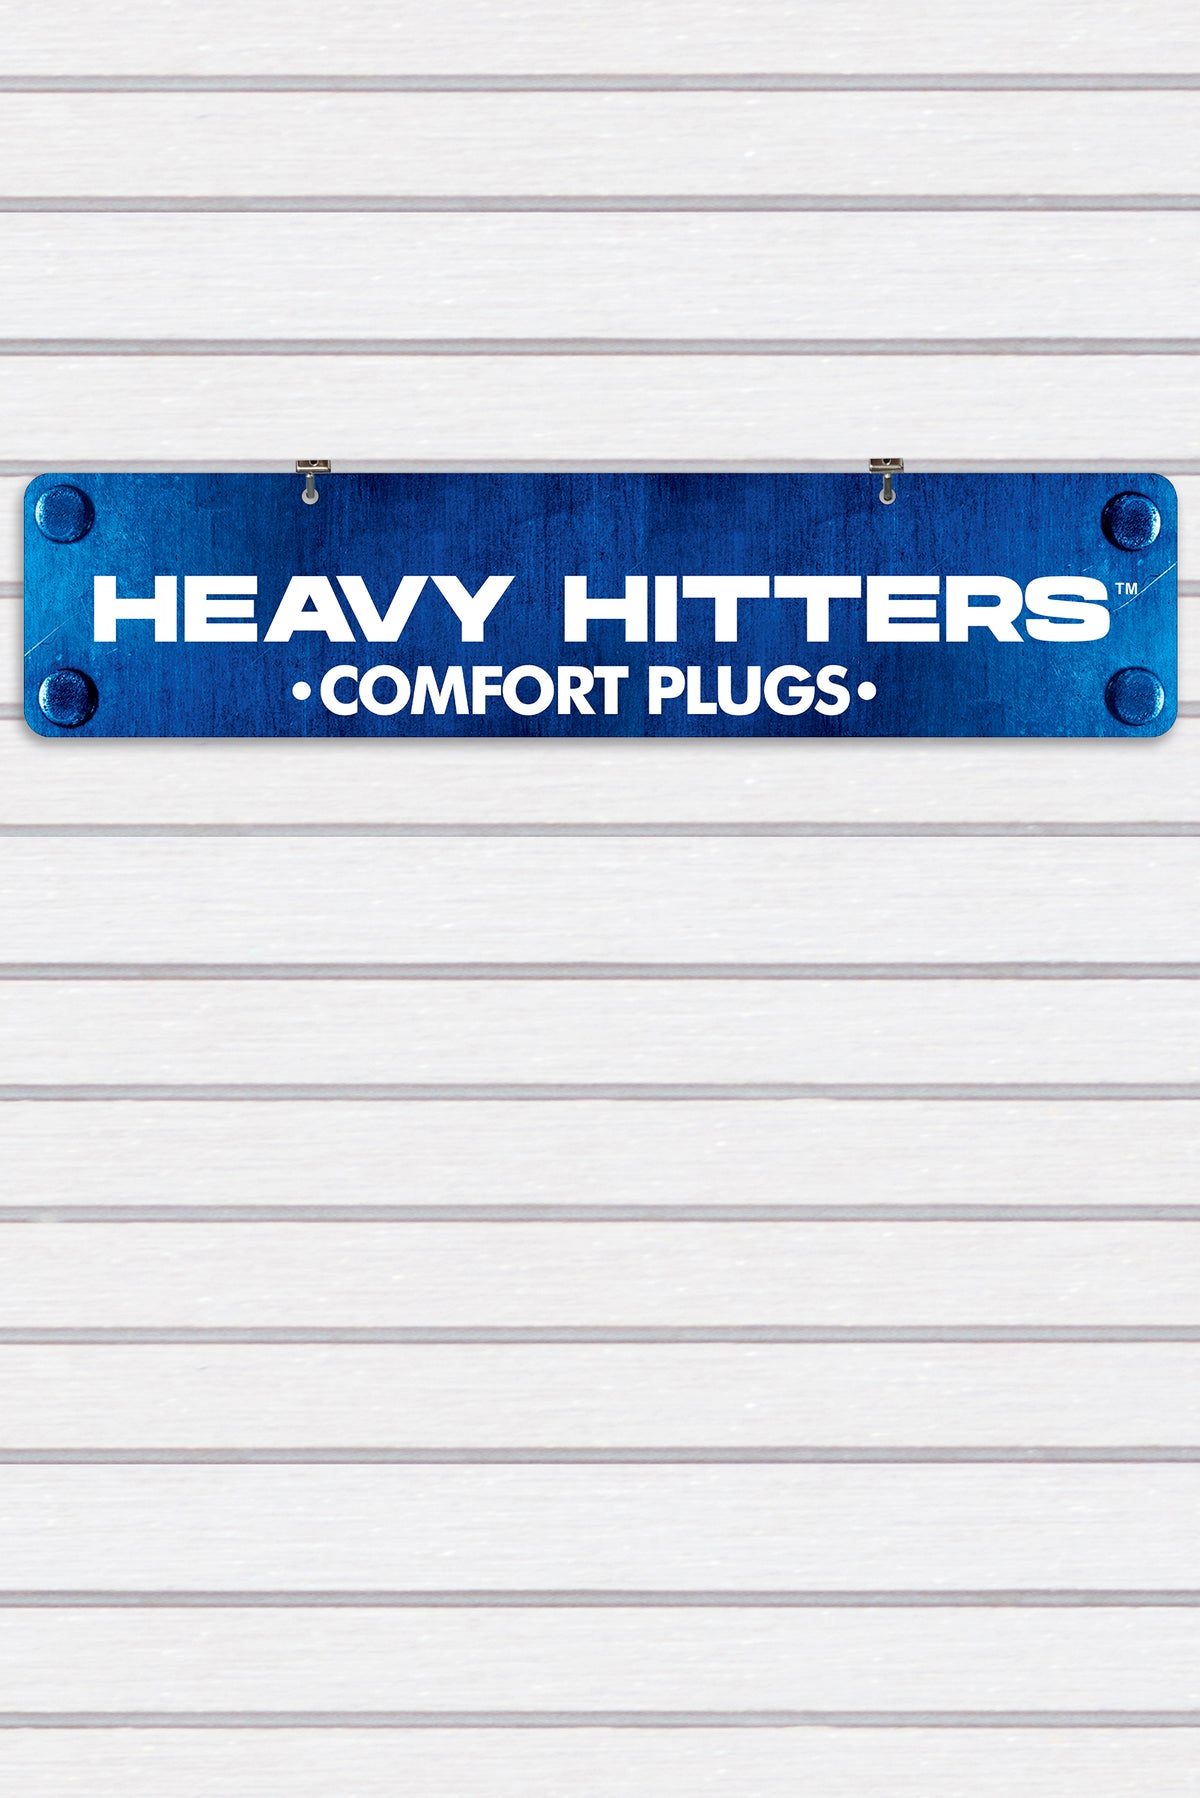 Heavy Hitters Display Sign